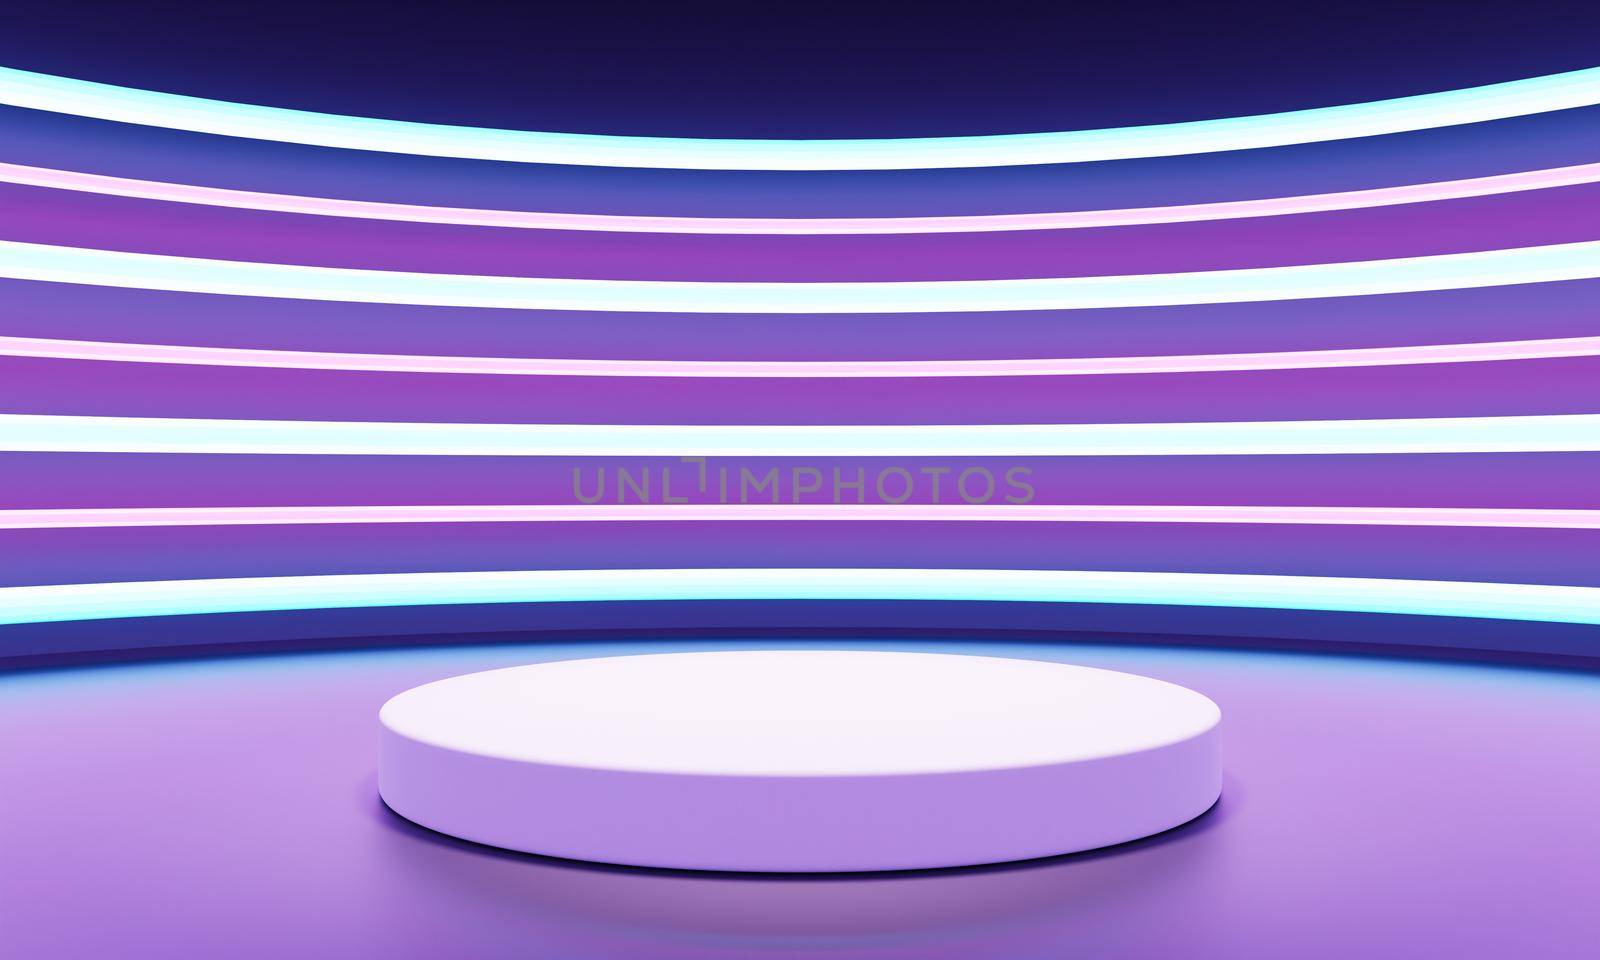 Cyberpunk sci-fi product podium showcase with blue purple and pink background. Technology and object concept. 3D illustration rendering